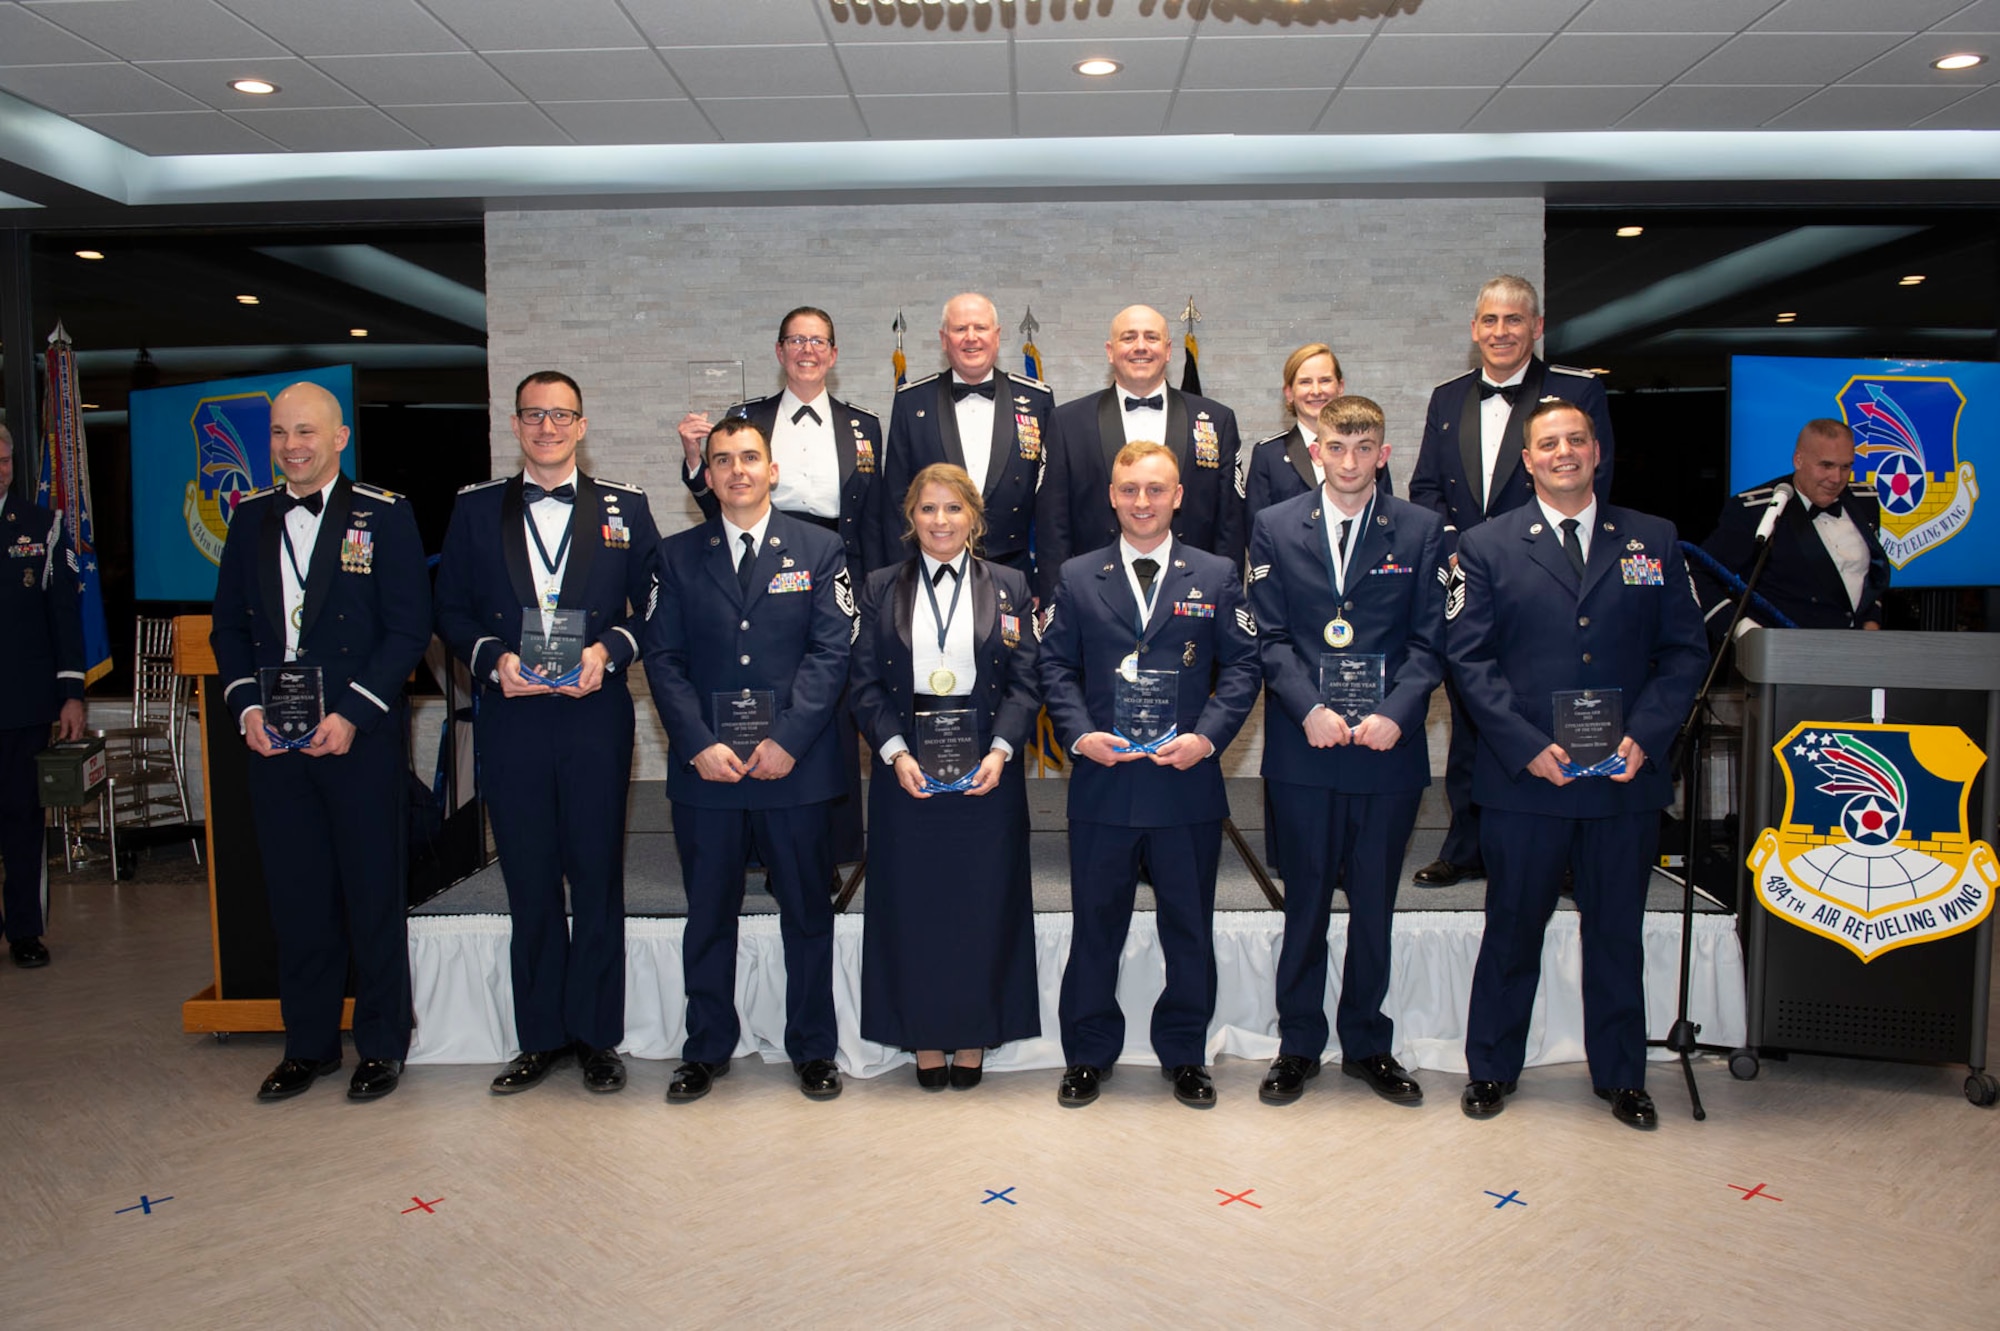 Grissom's annual award winners pose during the 80th Anniversary Ball. The winners were announced as part of the program celebrating the unit and base's storied history. Photo by Master Sgt. Rachel Barton.